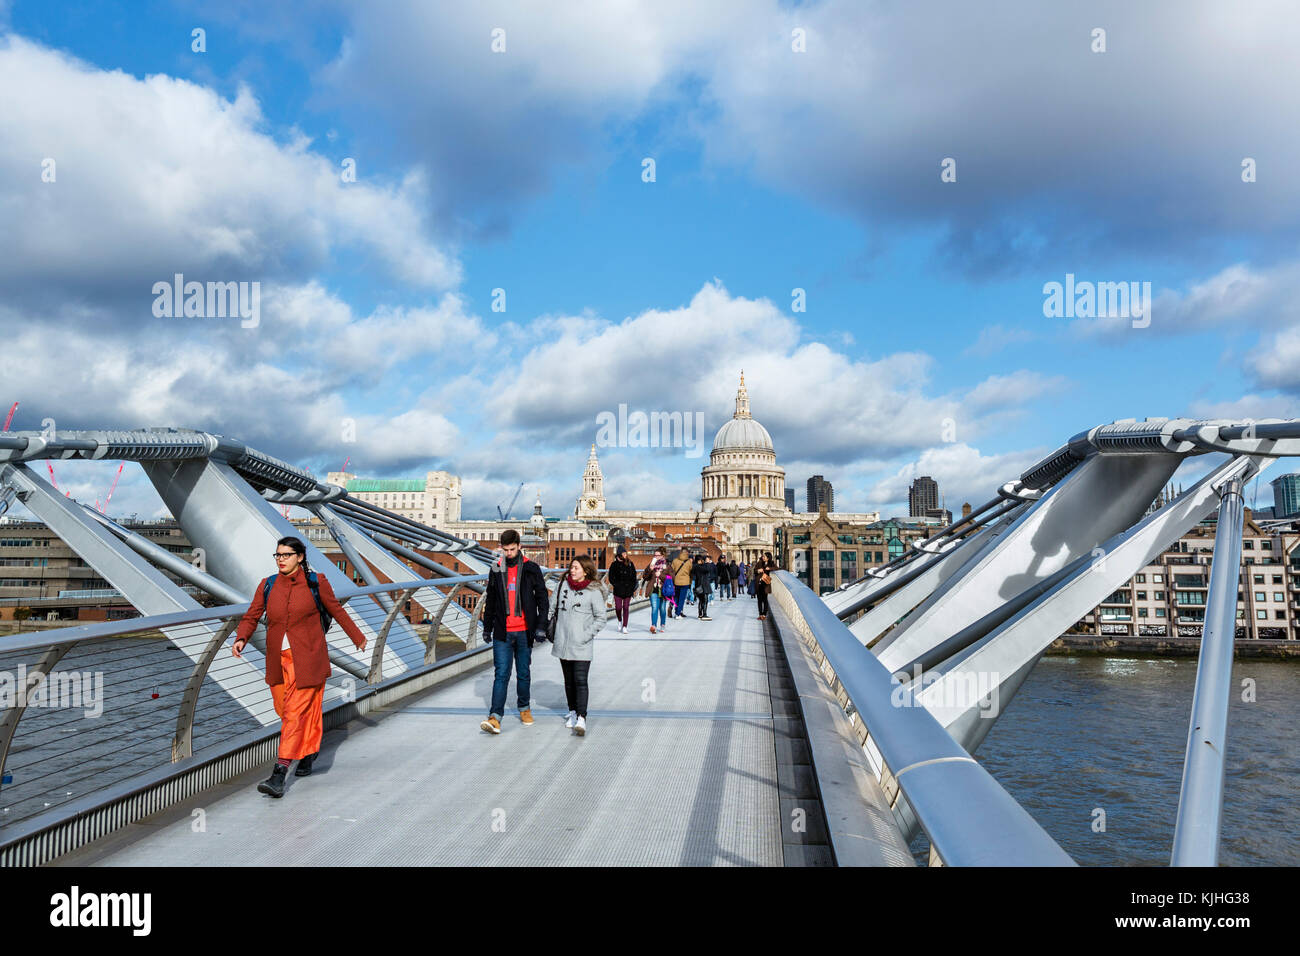 View across Millennium Bridge and River Thames towards St Paul's Cathedral, London, England, UK Stock Photo